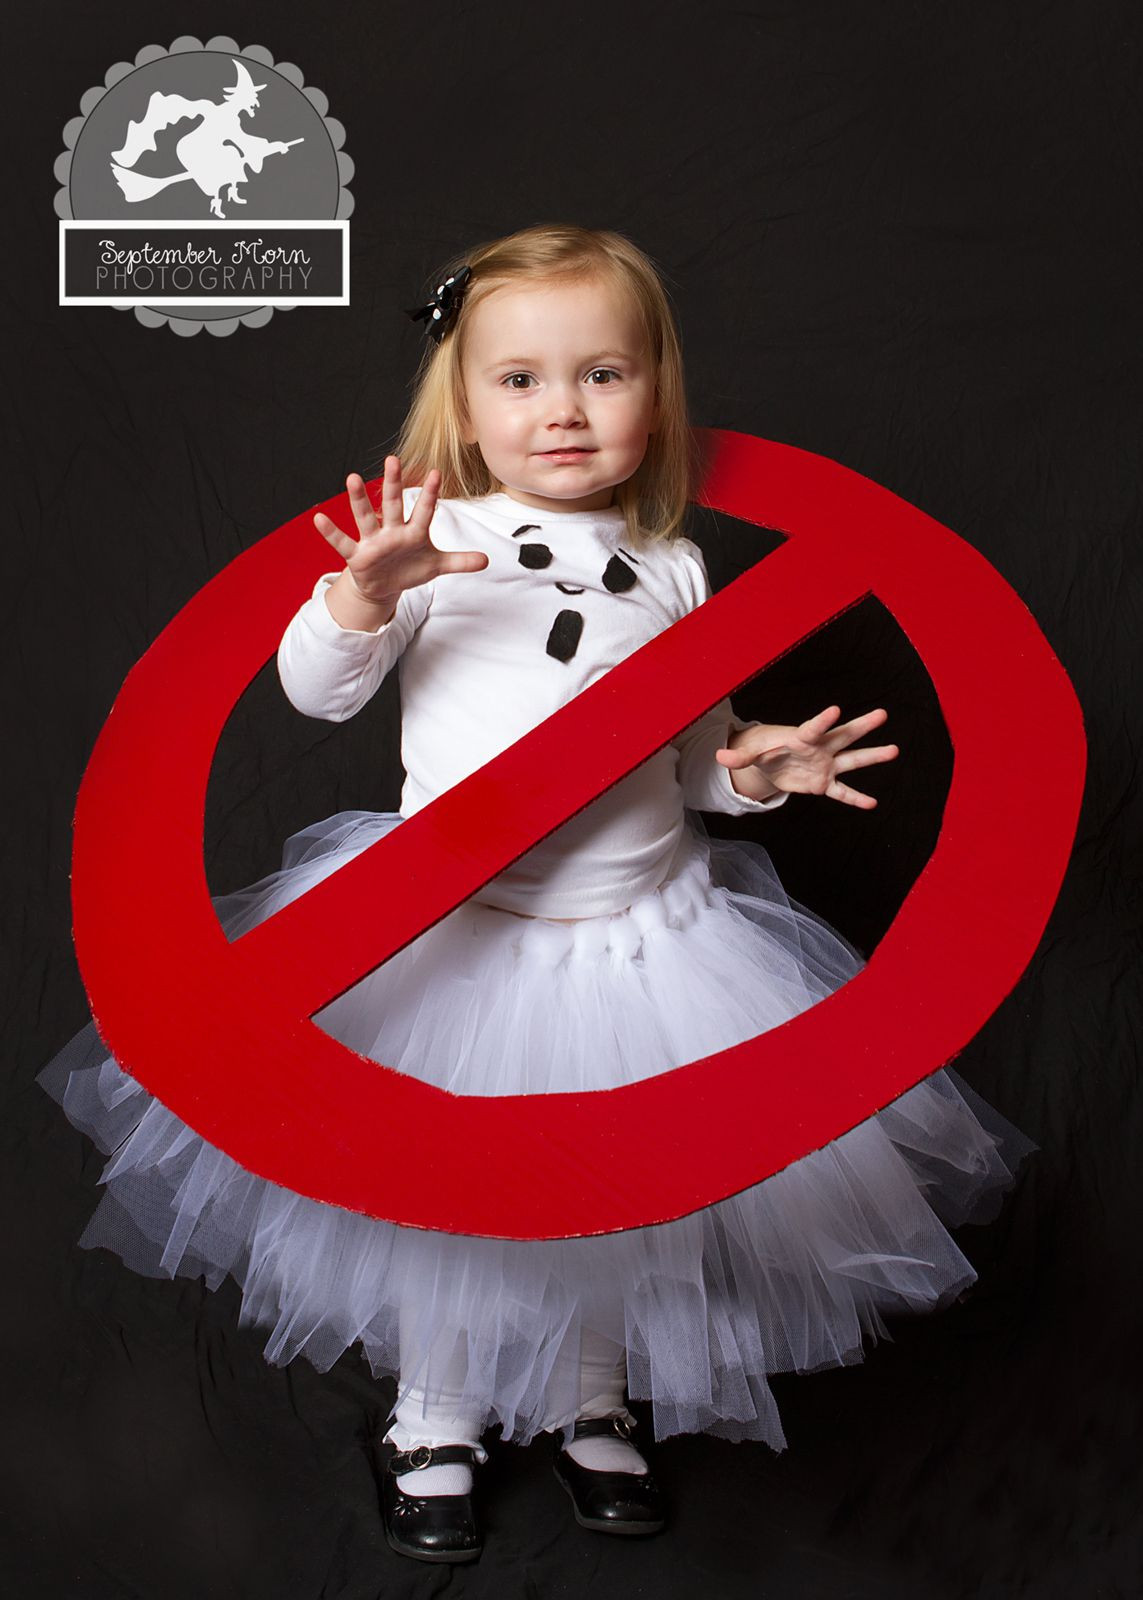 DIY Toddler Ghostbuster Costume
 Ghostbusters